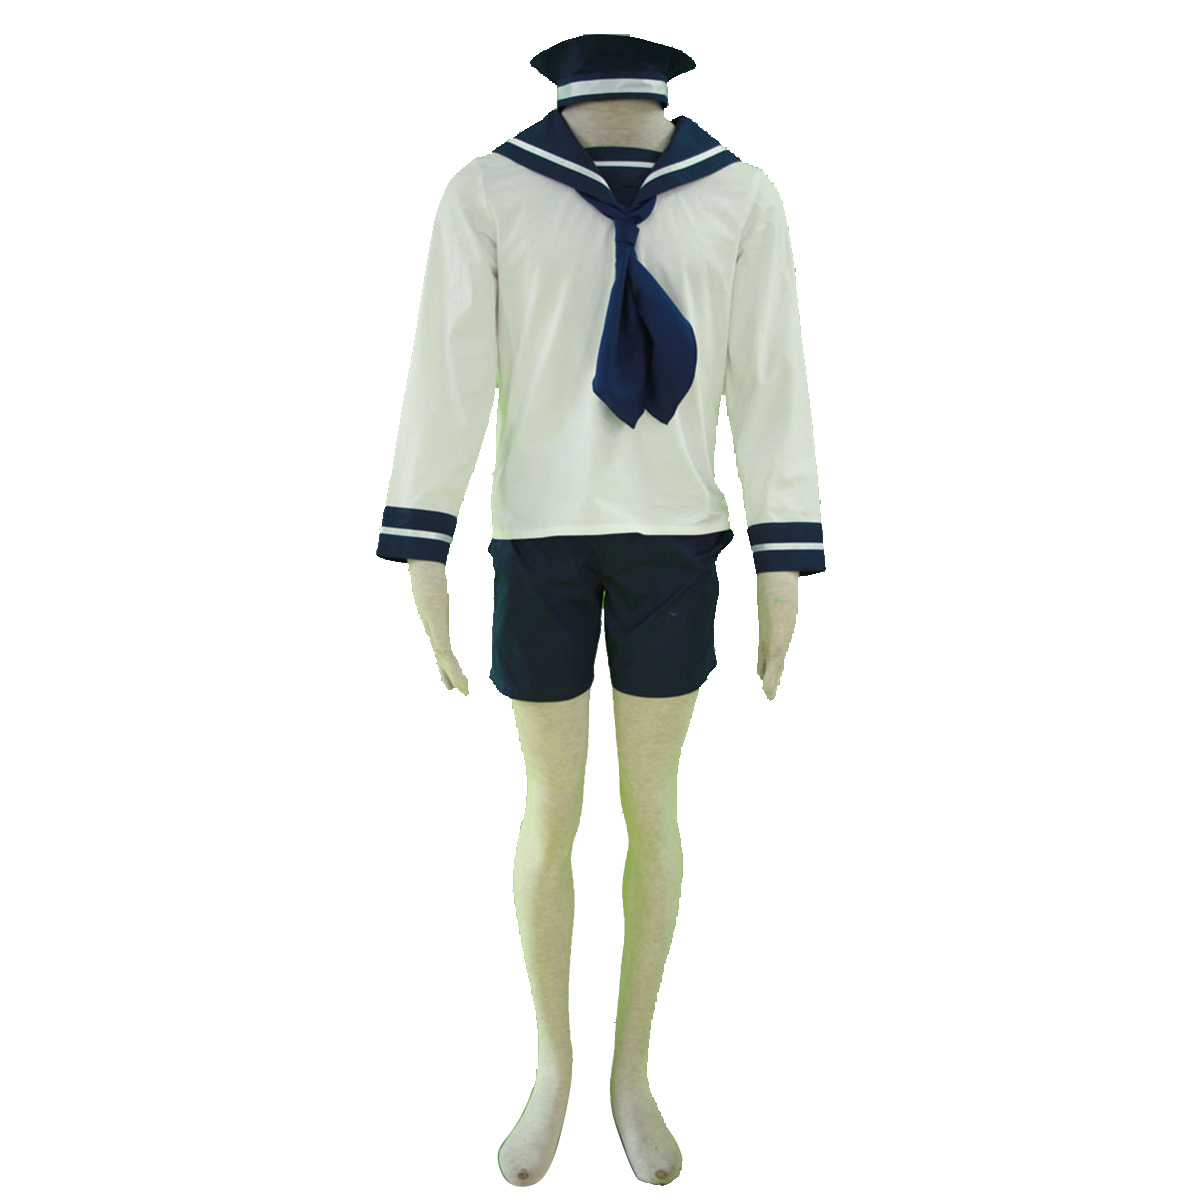 Axis Powers Hetalia North Italy Feliciano Vargas 1 Sailor Anime Cosplay Costumes Outfit